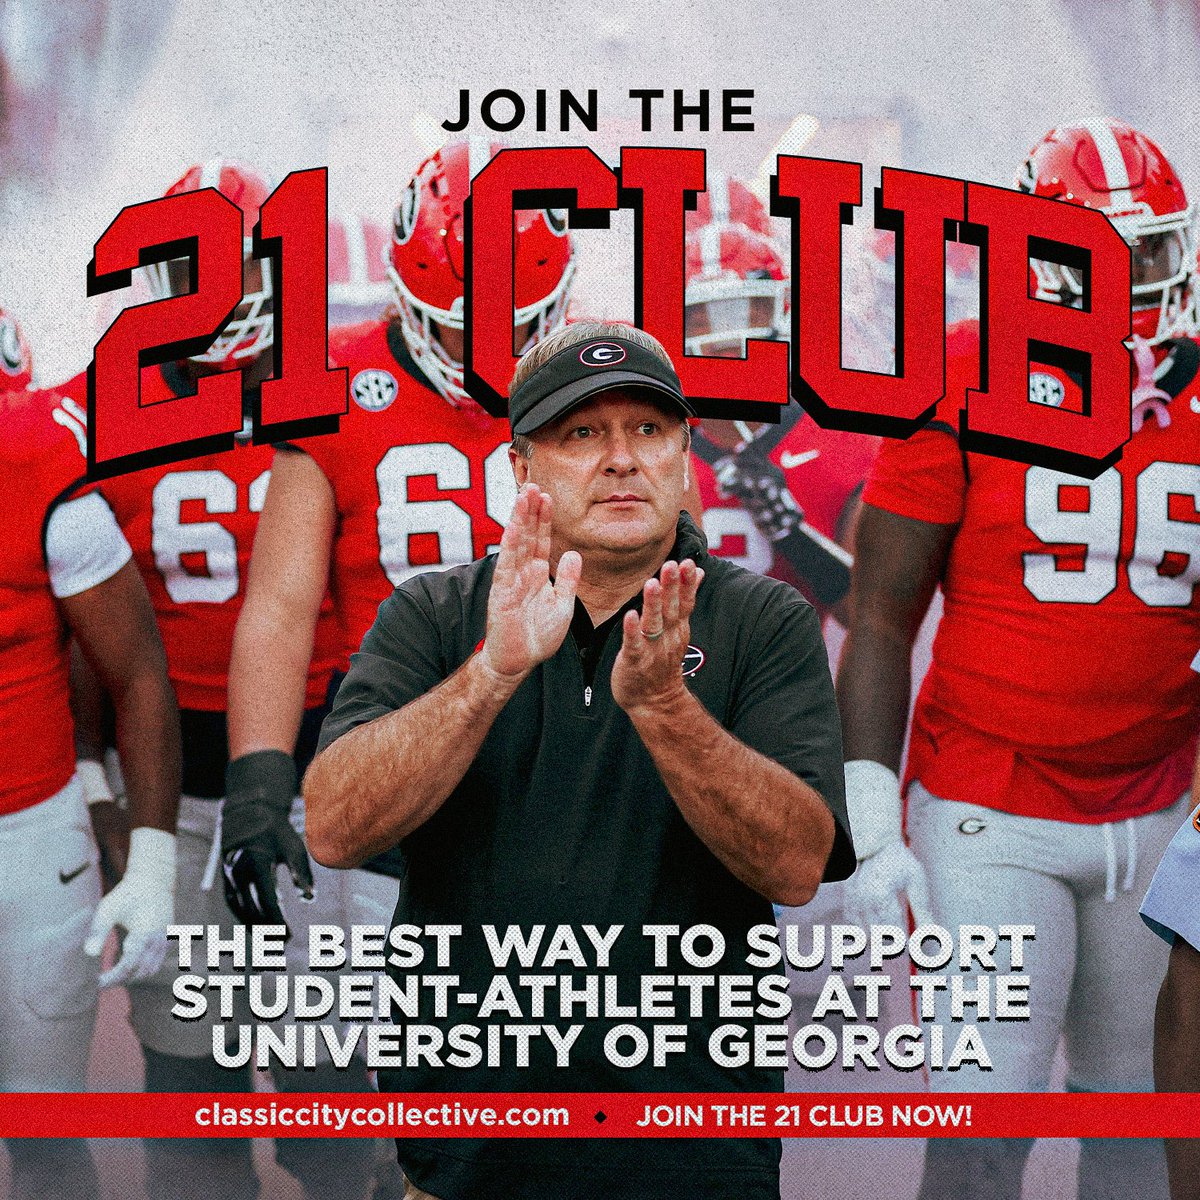 Consistency is the key to a championship program, and I've been consistent in my endorsement of the Classic City Collective. Giving to CCC is the best way to support NIL and our roster of athletes. Go to classiccitycollective.com/contribute to help keep the Dawgs on Top. #GoDawgs